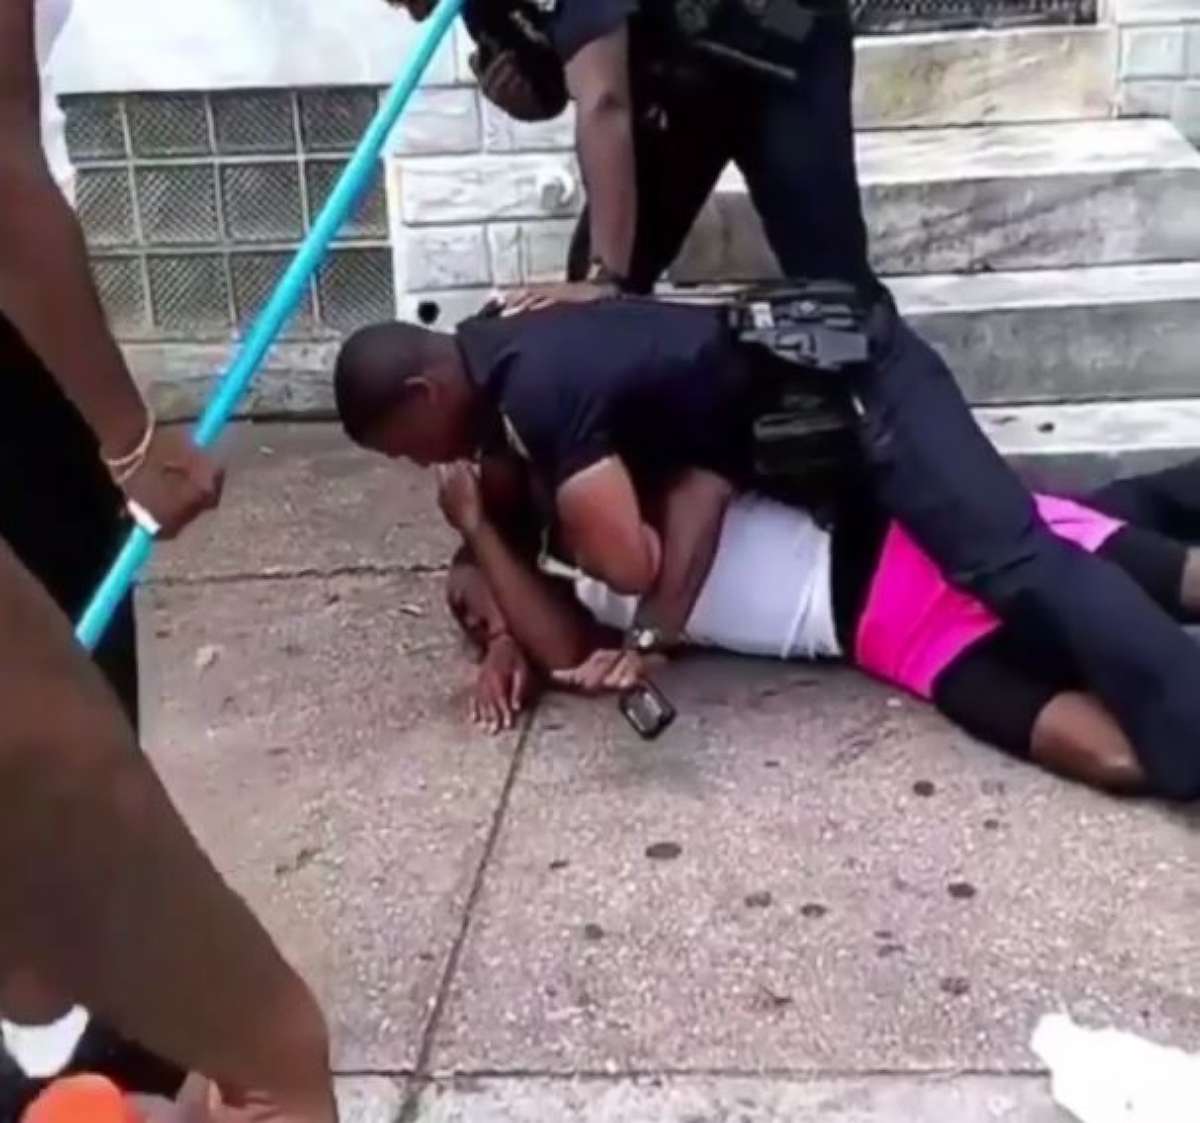 PHOTO: A Baltimore police officer was suspended on Aug. 11, 2018, after he was seen on video repeatedly punching a man who refused to show identification.